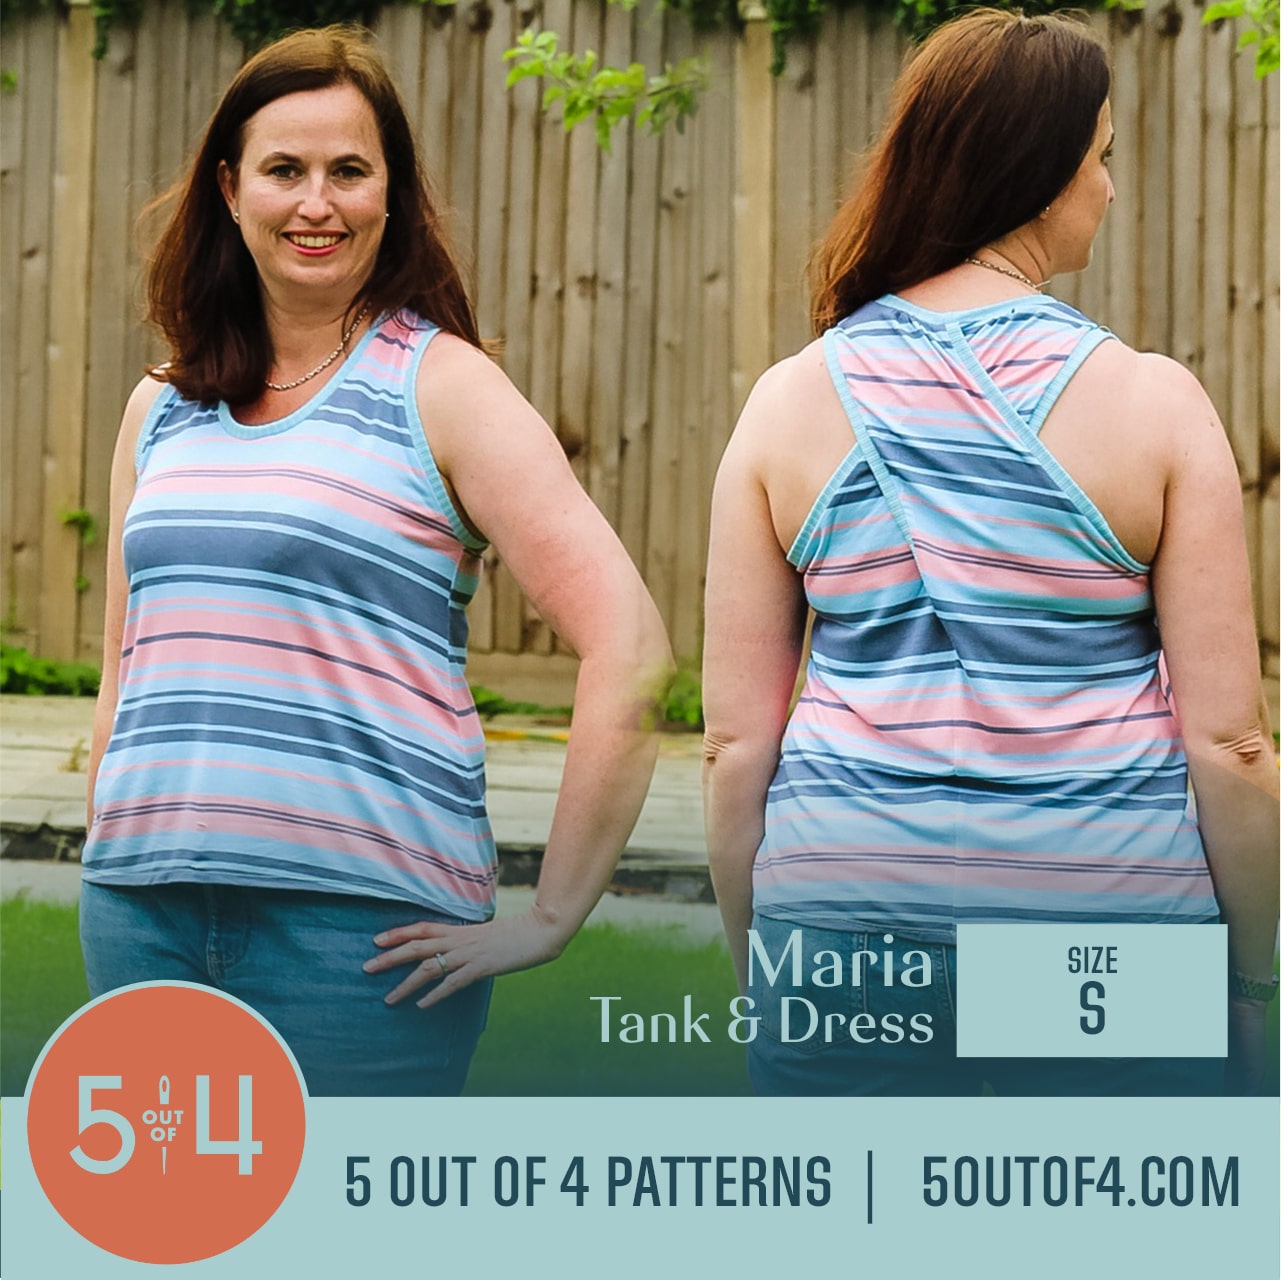 Maria Tank and Dress - 5 out of 4 Patterns